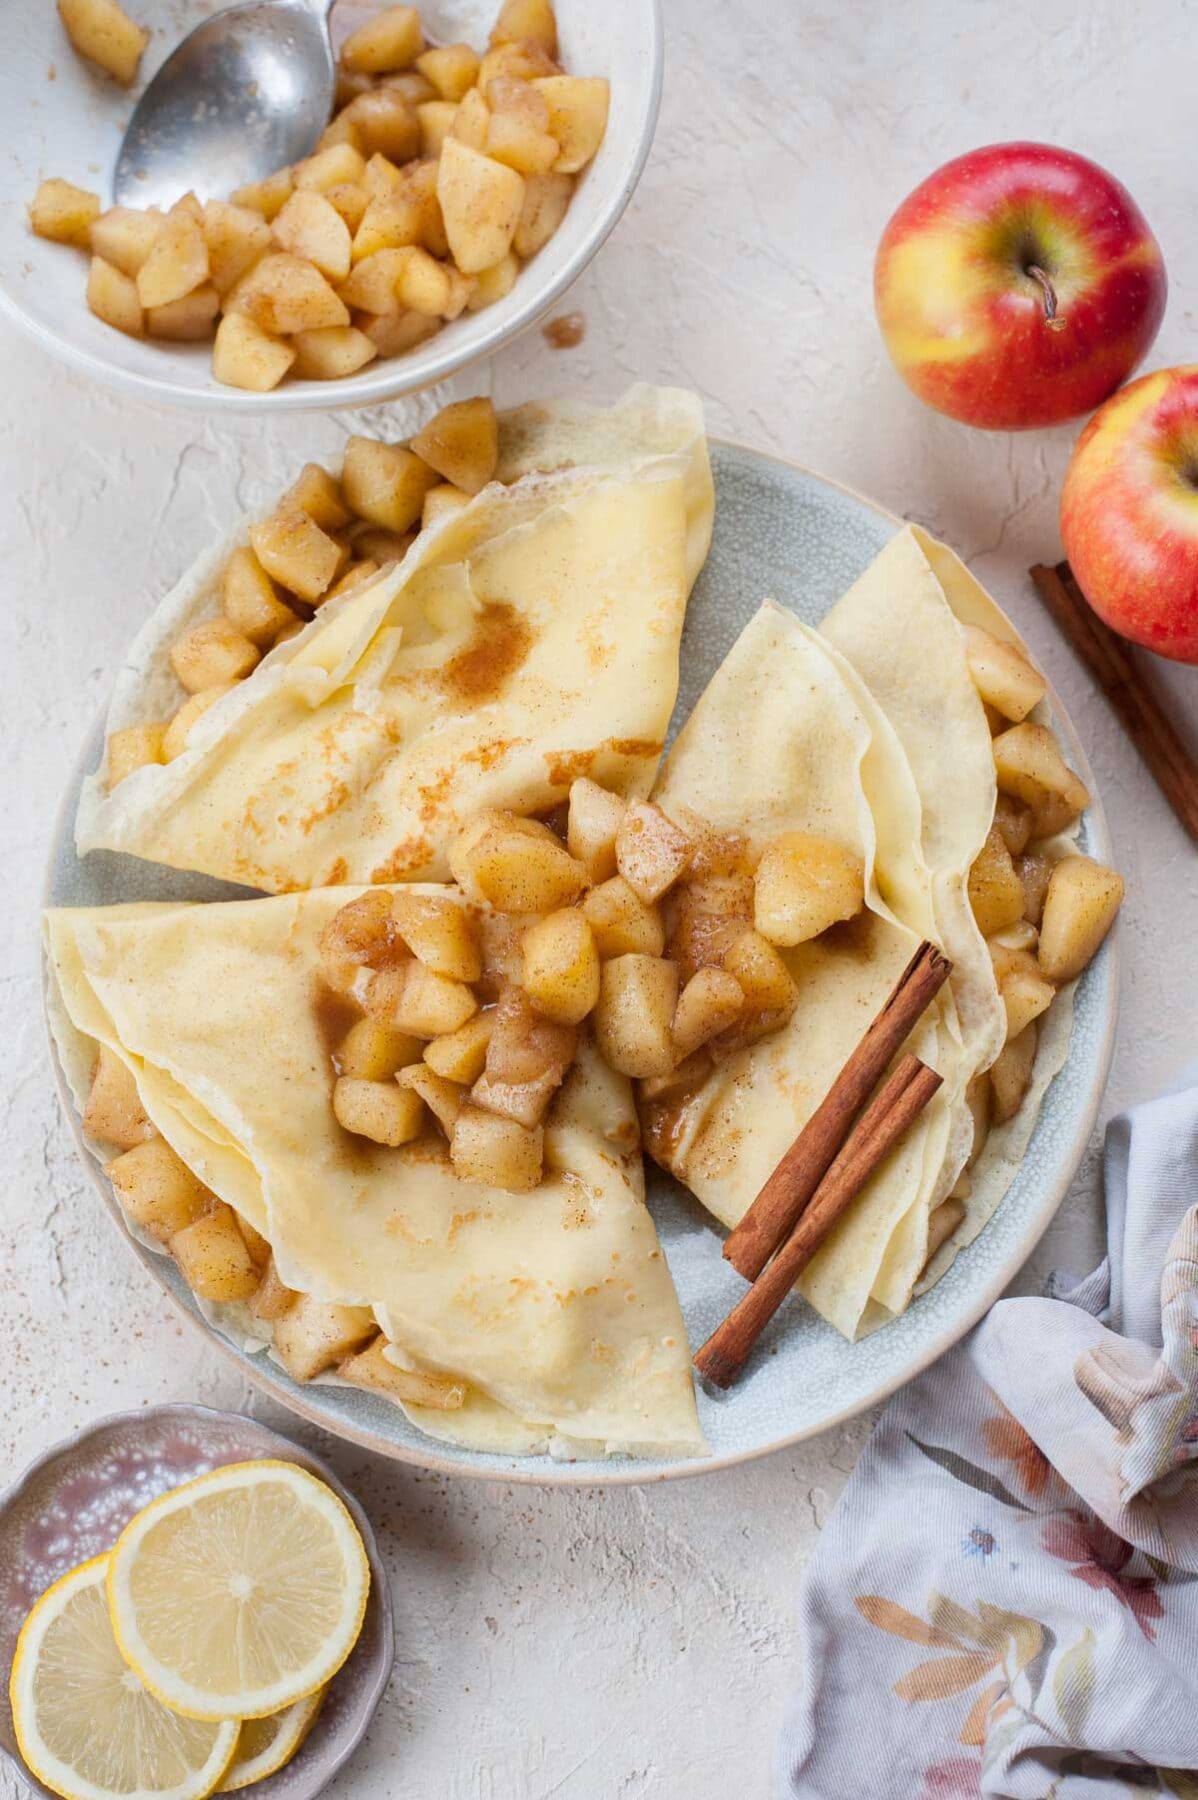 Apple crepes on a blue plate, topped with sauteed apples and cinnamon sticks.